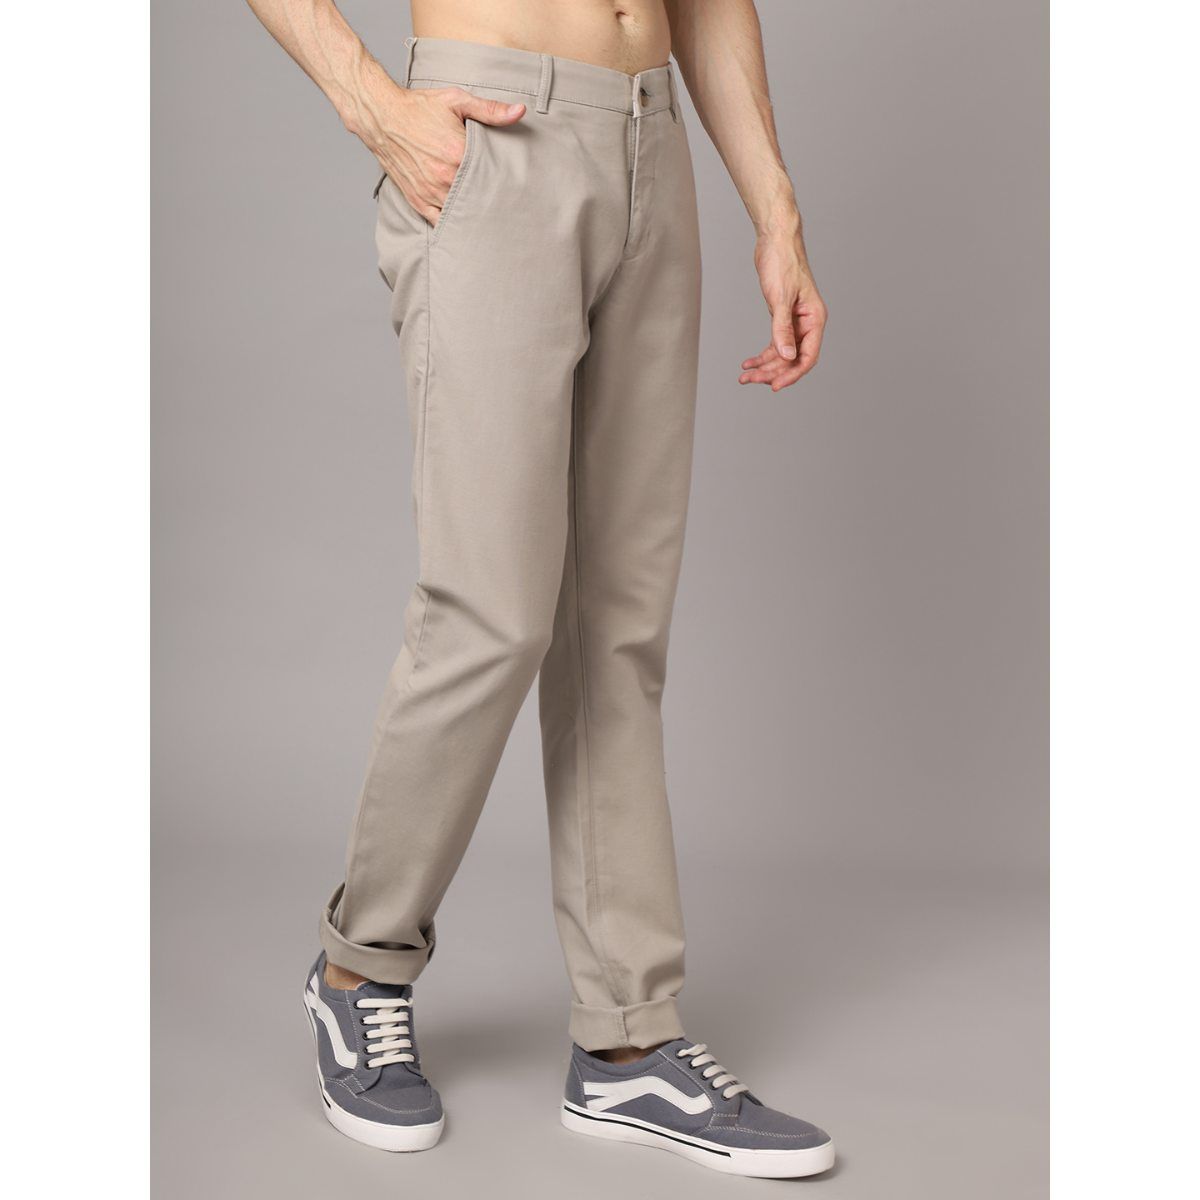 Buy Stone Straight Printed Belted Soft Touch Chino Trousers from Next USA